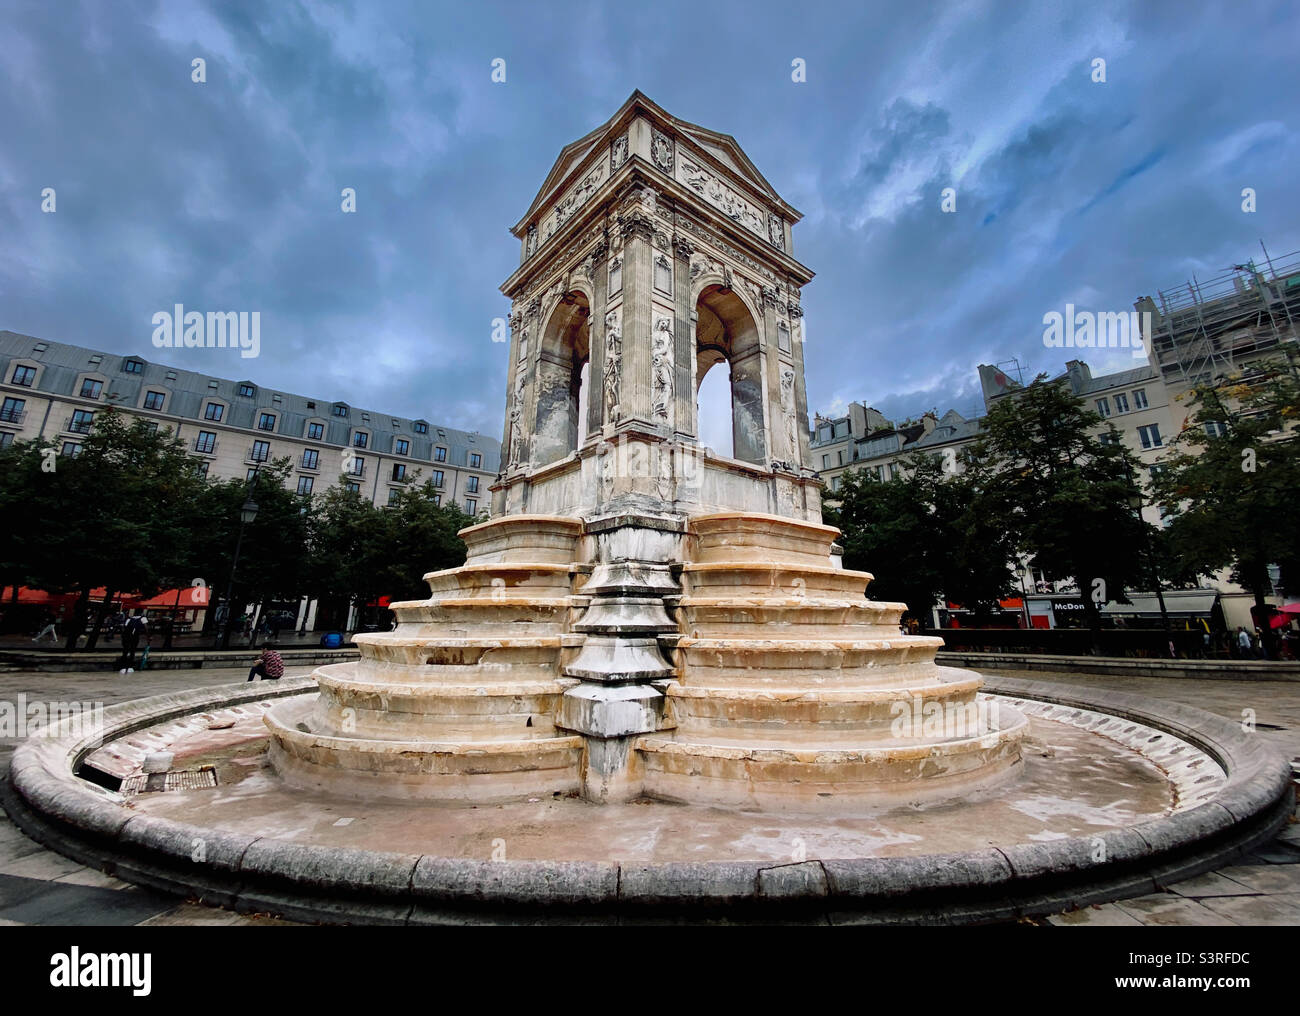 Fontaine des Innocents (Fountain of the Innocents) in the place Joachim-du-Bellay, the former Holy Innocents Cemetery, in Paris, France Stock Photo